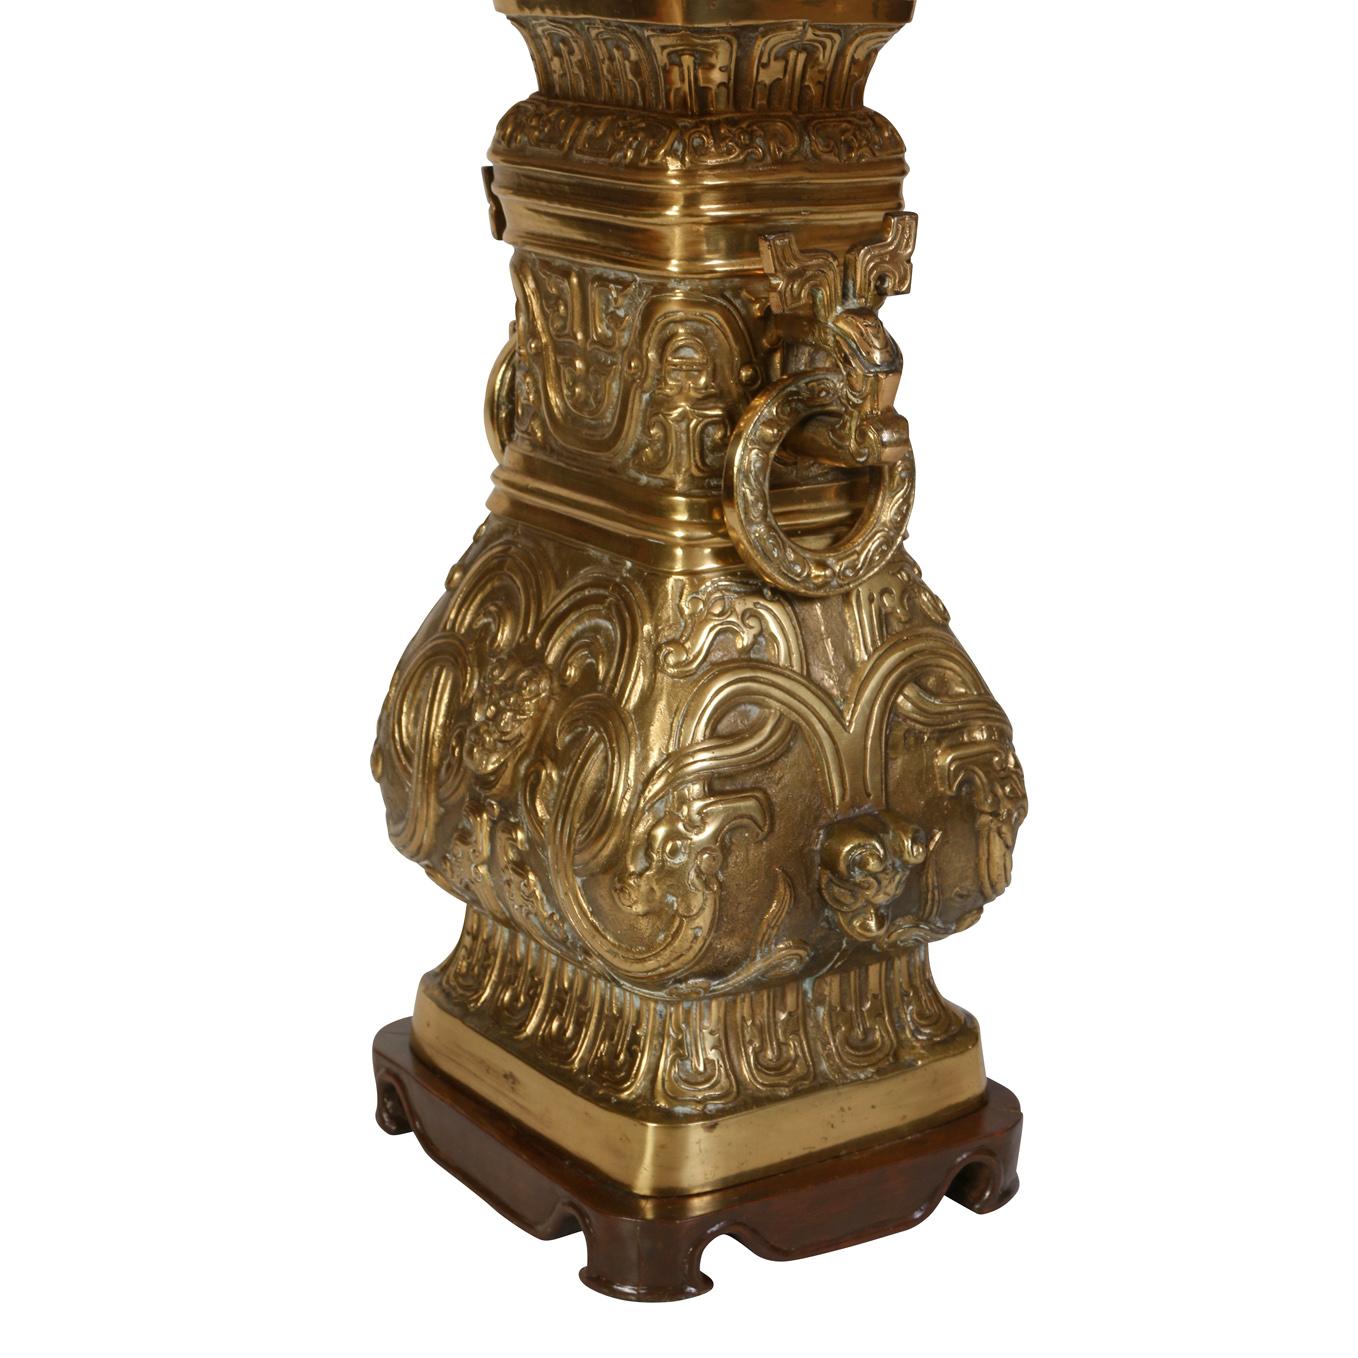 An antique bronze Asian lamp with two ring handles and raised relief detail on all sides set on a wood base.